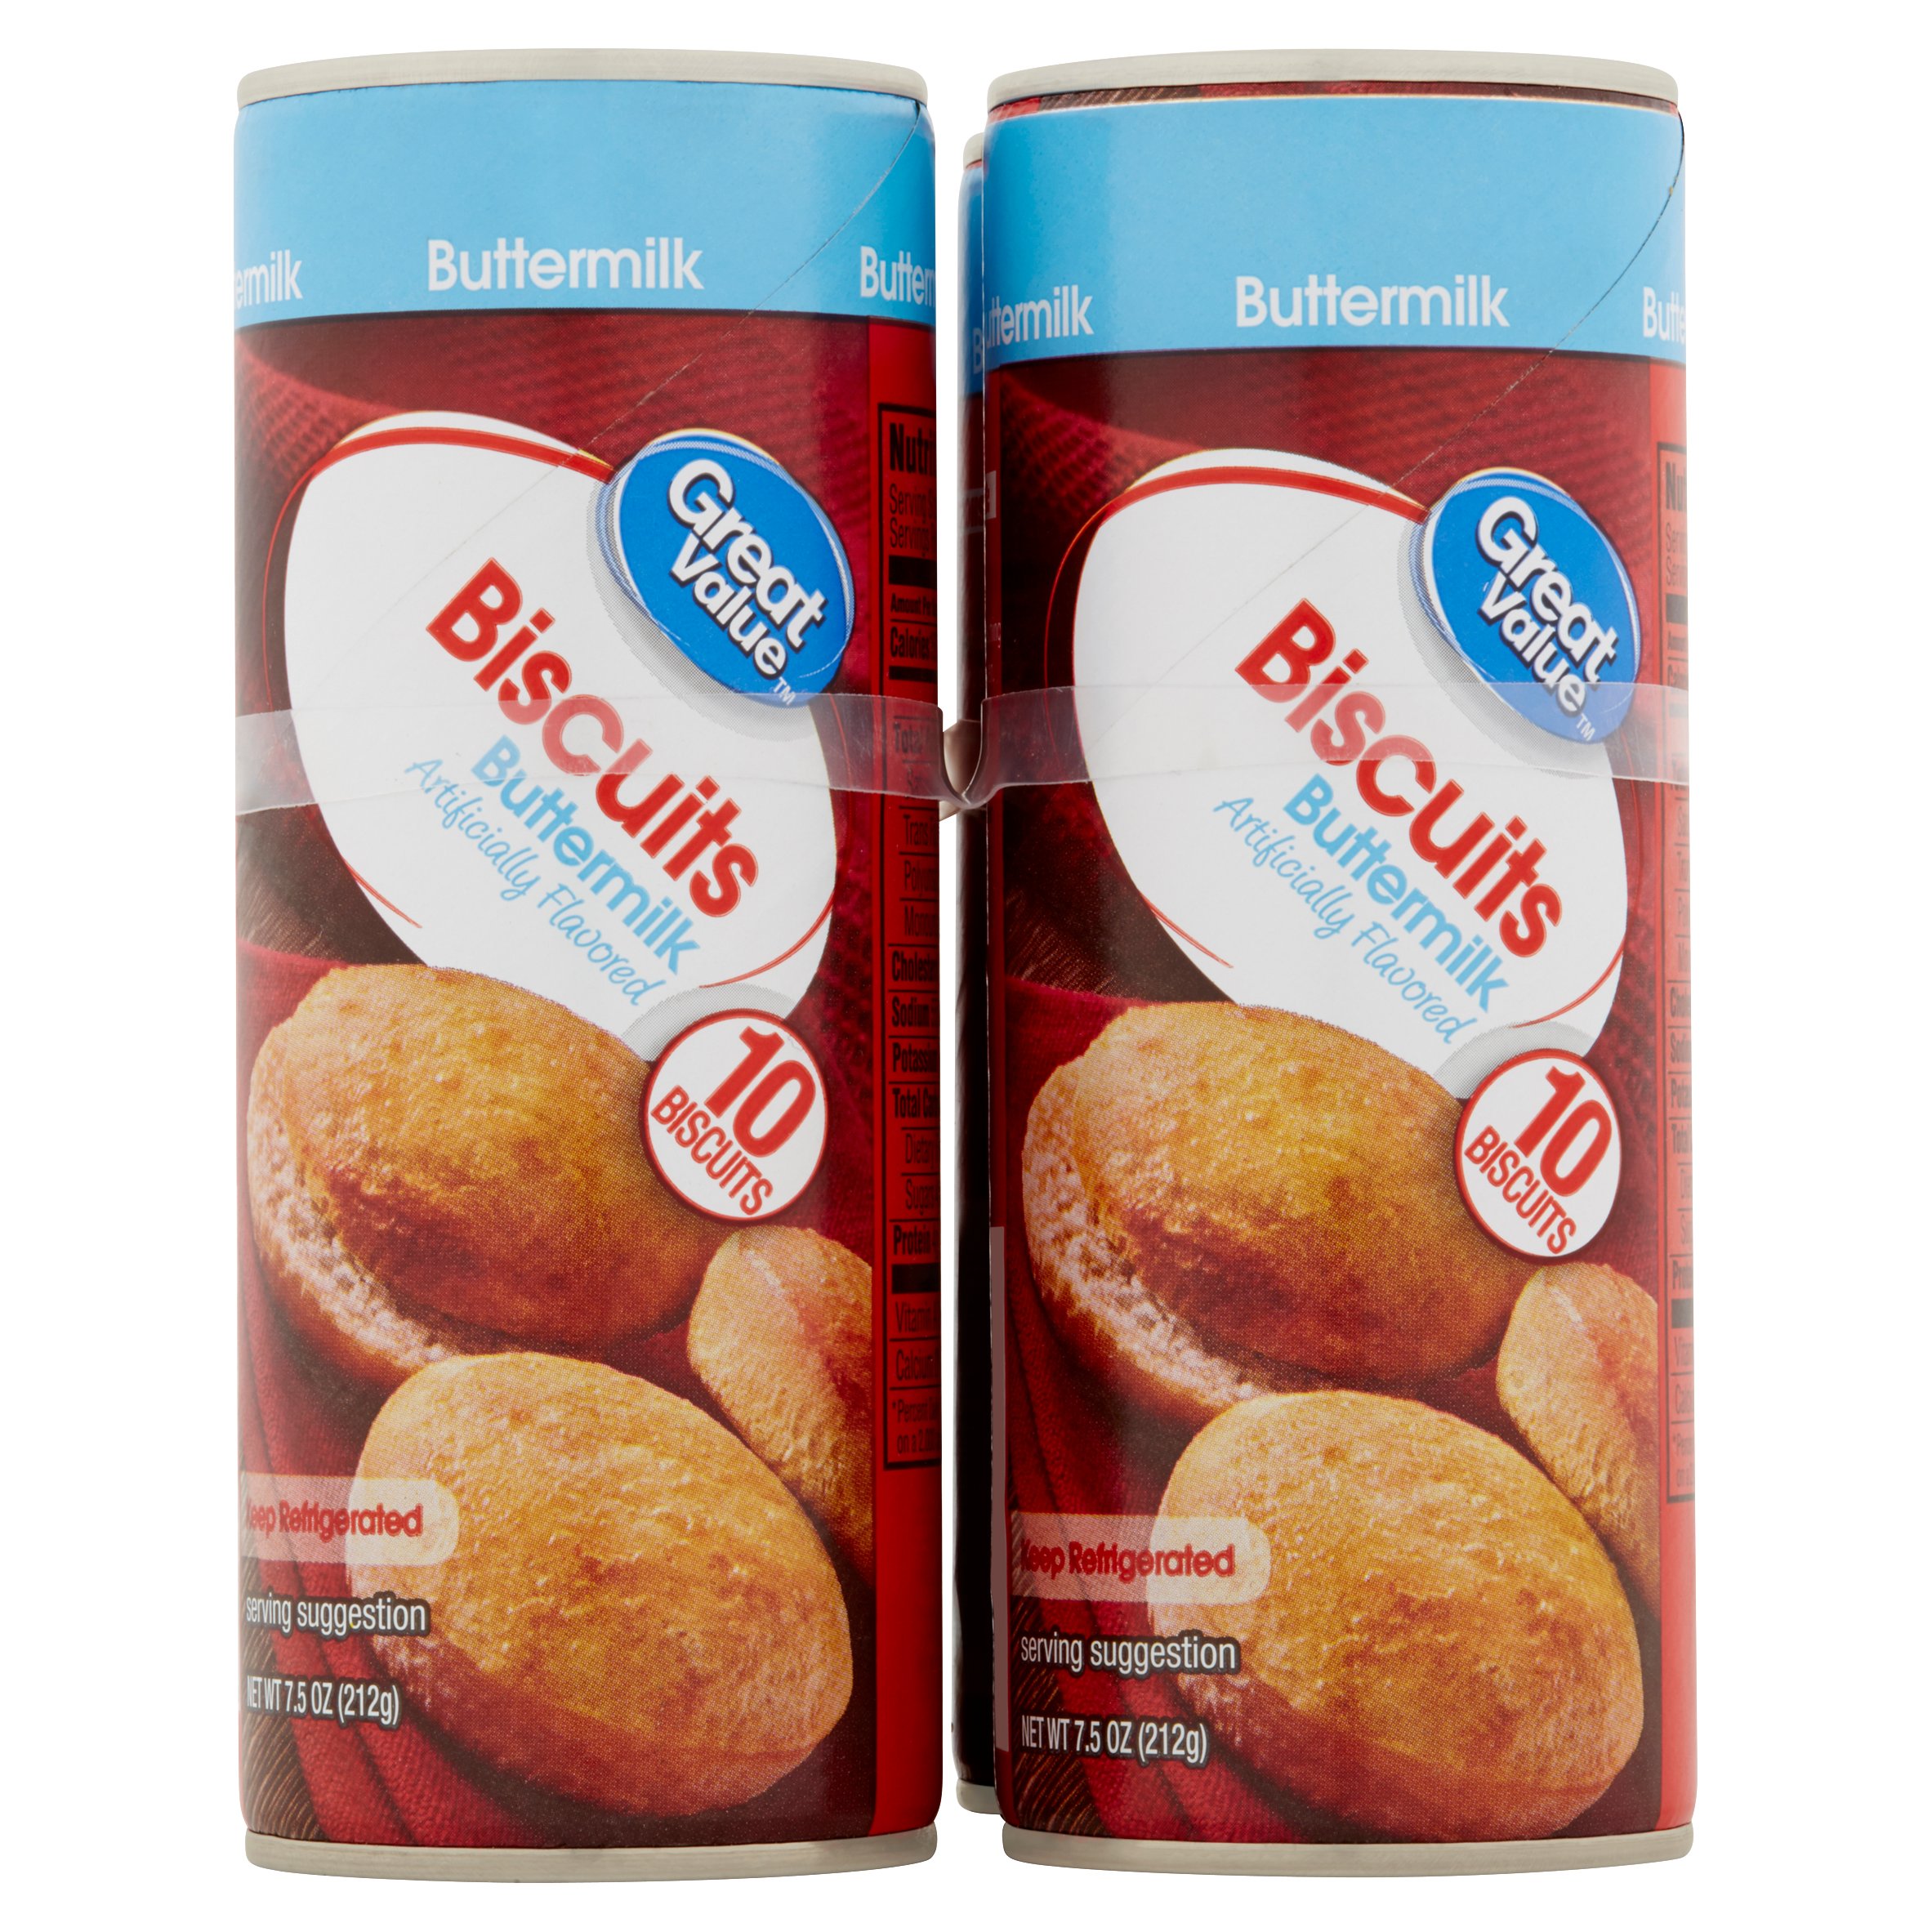 Great Value, Buttermilk Biscuits, 7.5 Oz., 4 Count Image